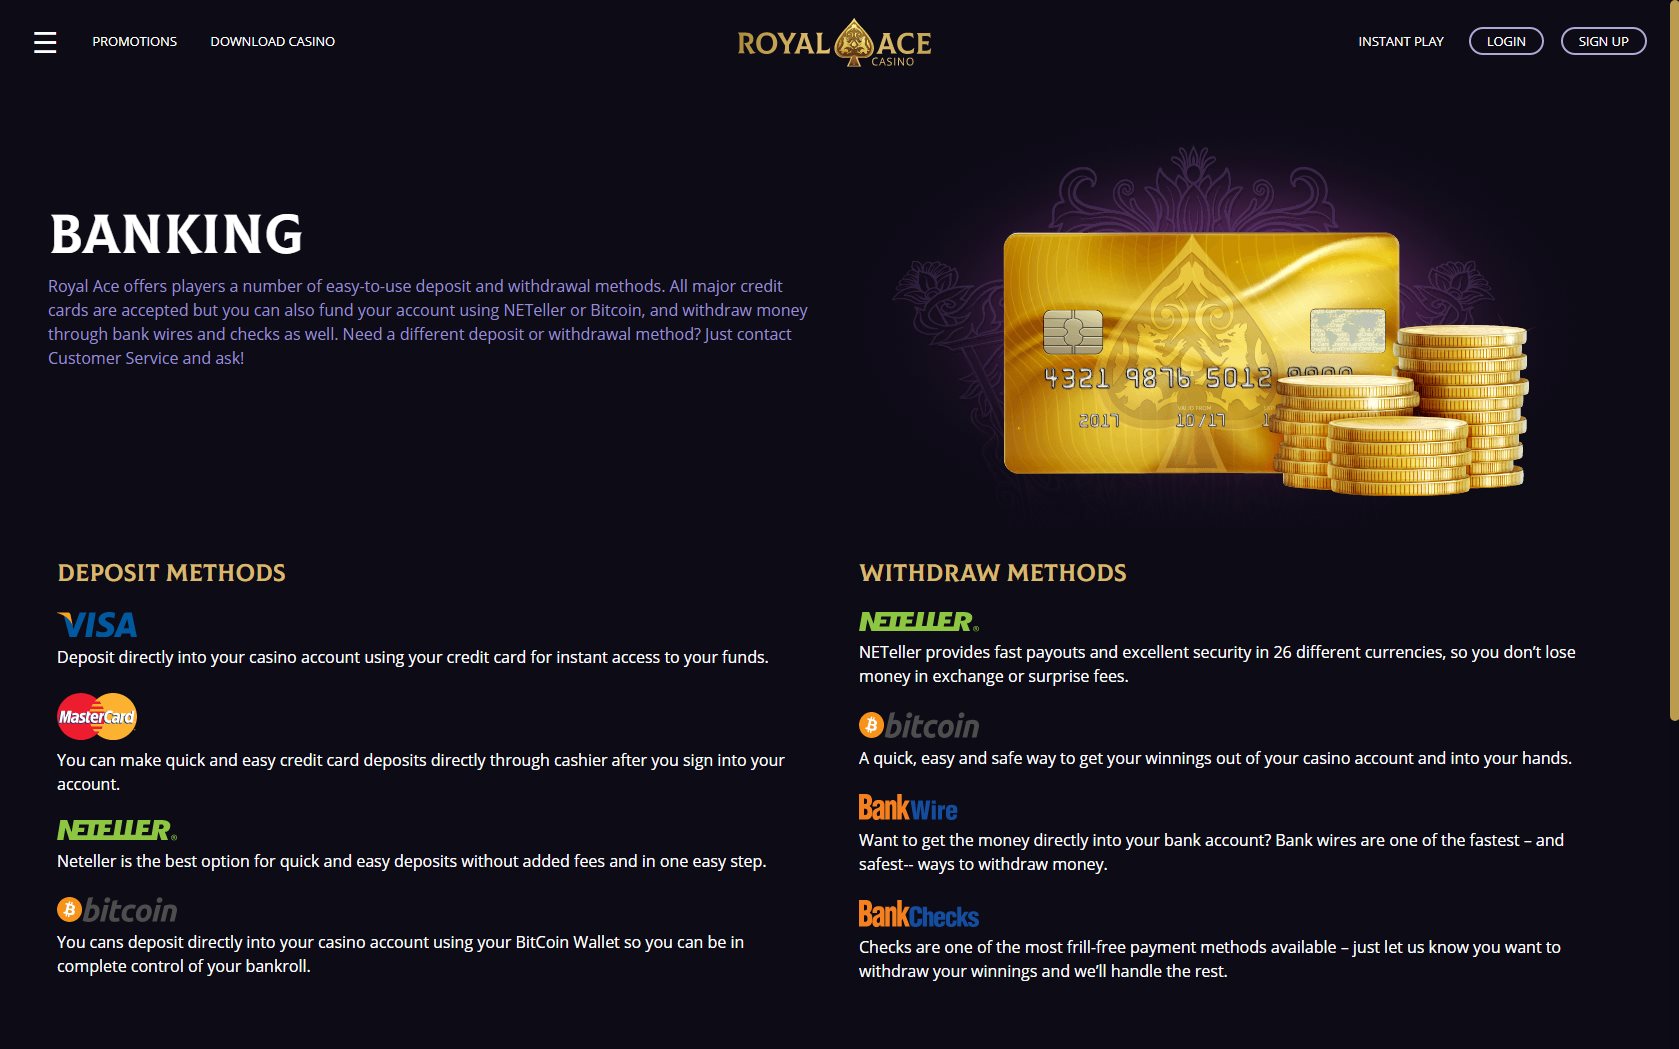 Royal Ace Casino Payment Methods